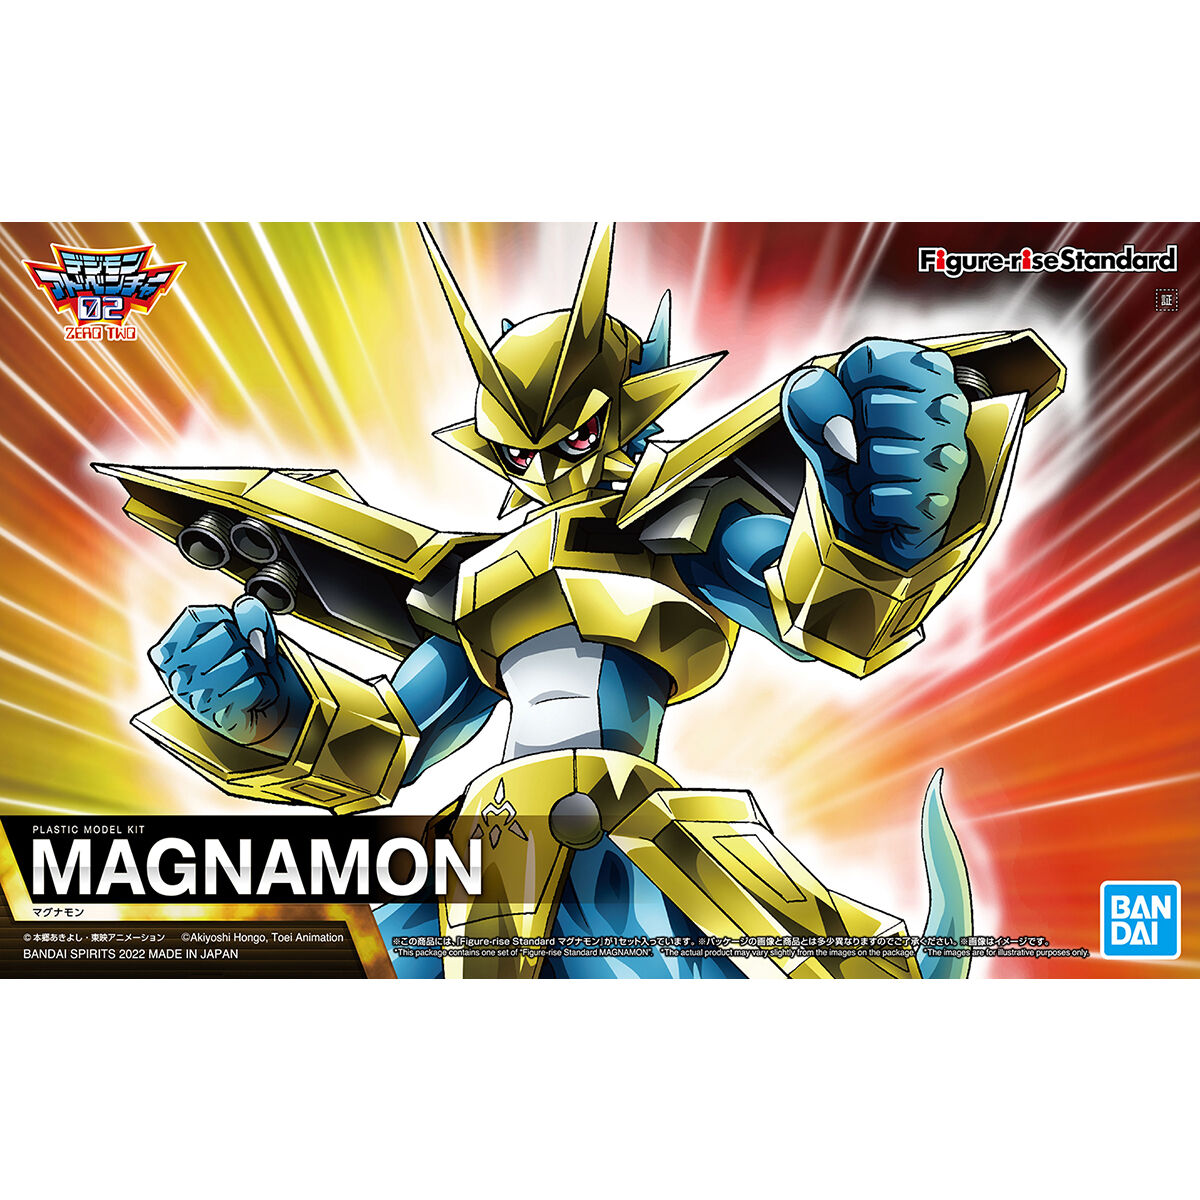 Digimon - Magnamon - Figure-rise Standard Model Kit, Evolved form of main character's partner Digimon from Digimon Adventure 02, Wide range of motion joints for dynamic action poses, Movable shoulder armor and intricate internal structure details, Easy assembly with parts division, Includes sticker, Released by Bandai on 2022-02-19, Sold by Nippon Figures